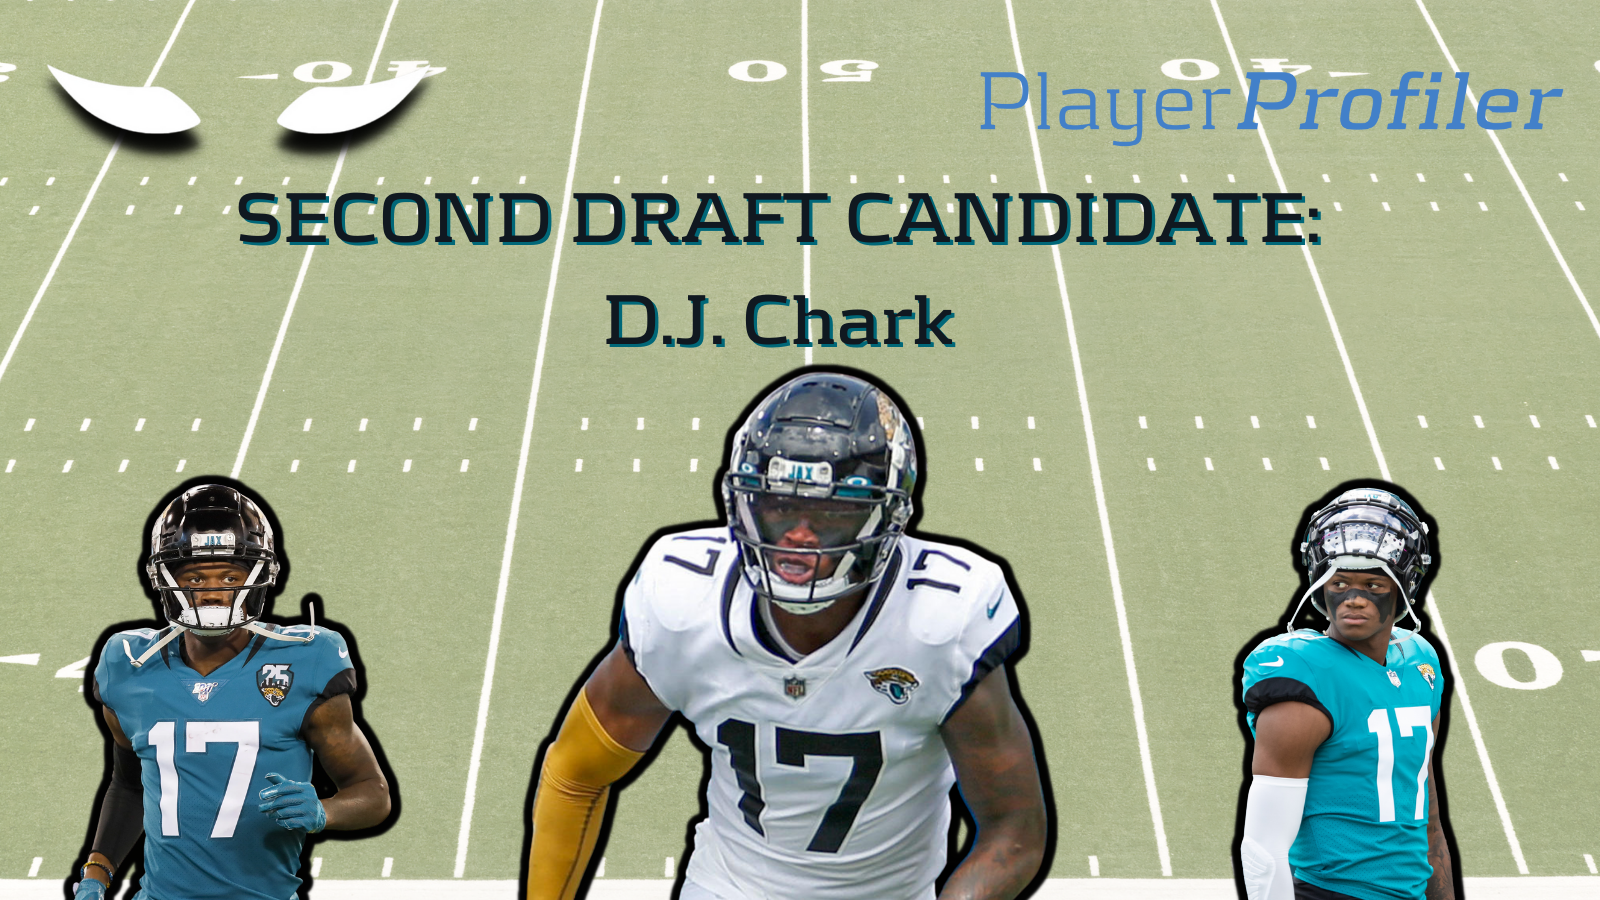 Second Draft WR Candidate